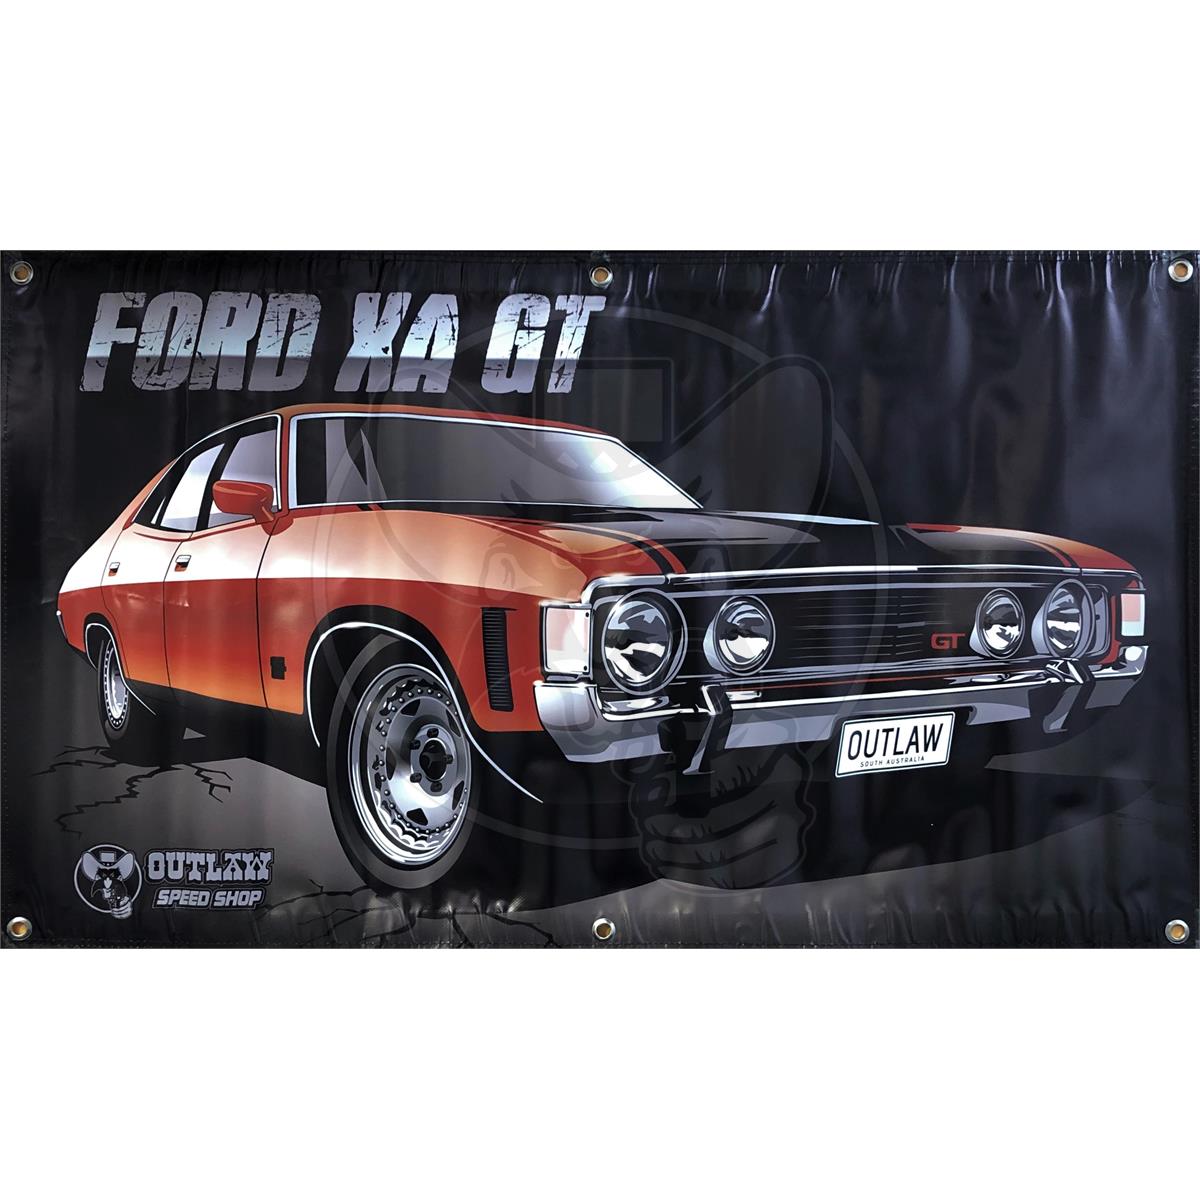 OUTLAW BANNER 1200MM X 700MM FITS FORD XA GT FALCON BROWN